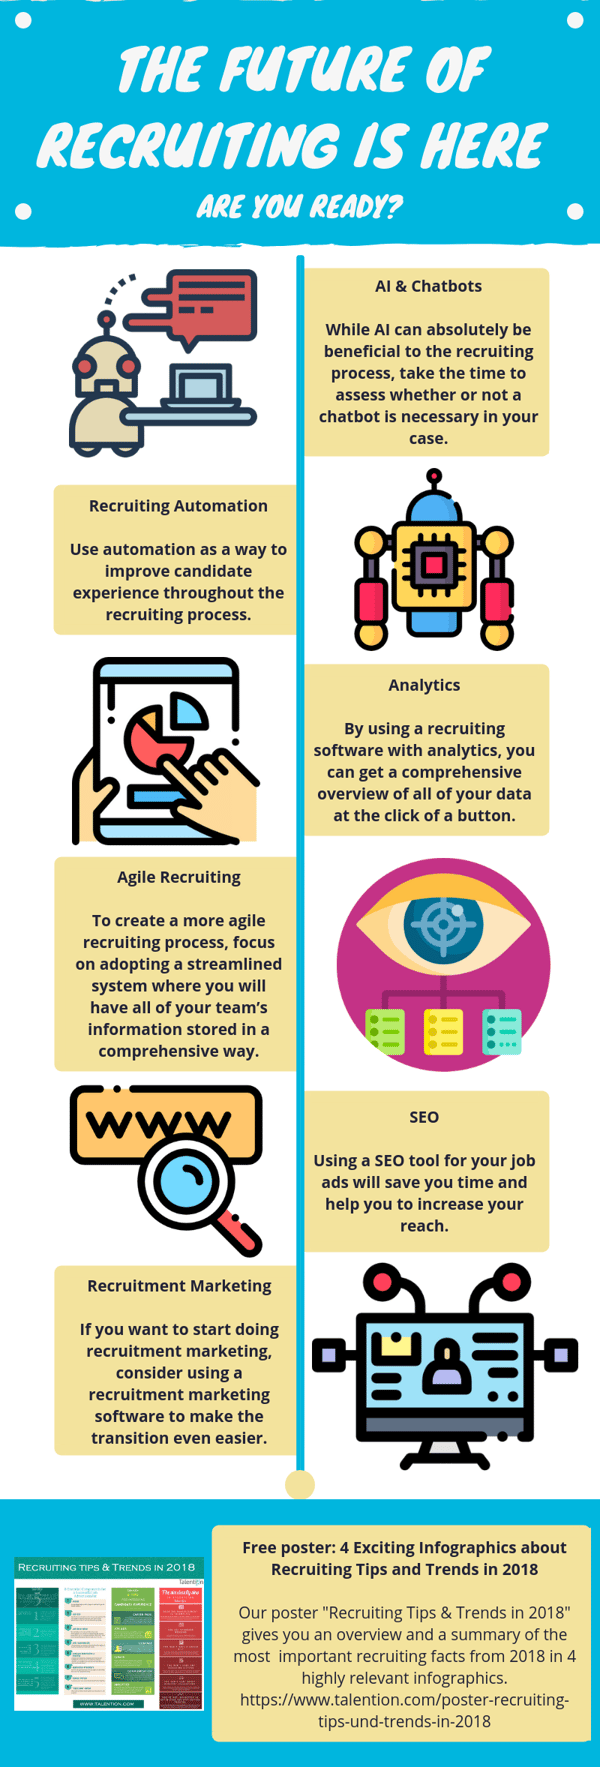 The Future of Recruiting Infographic